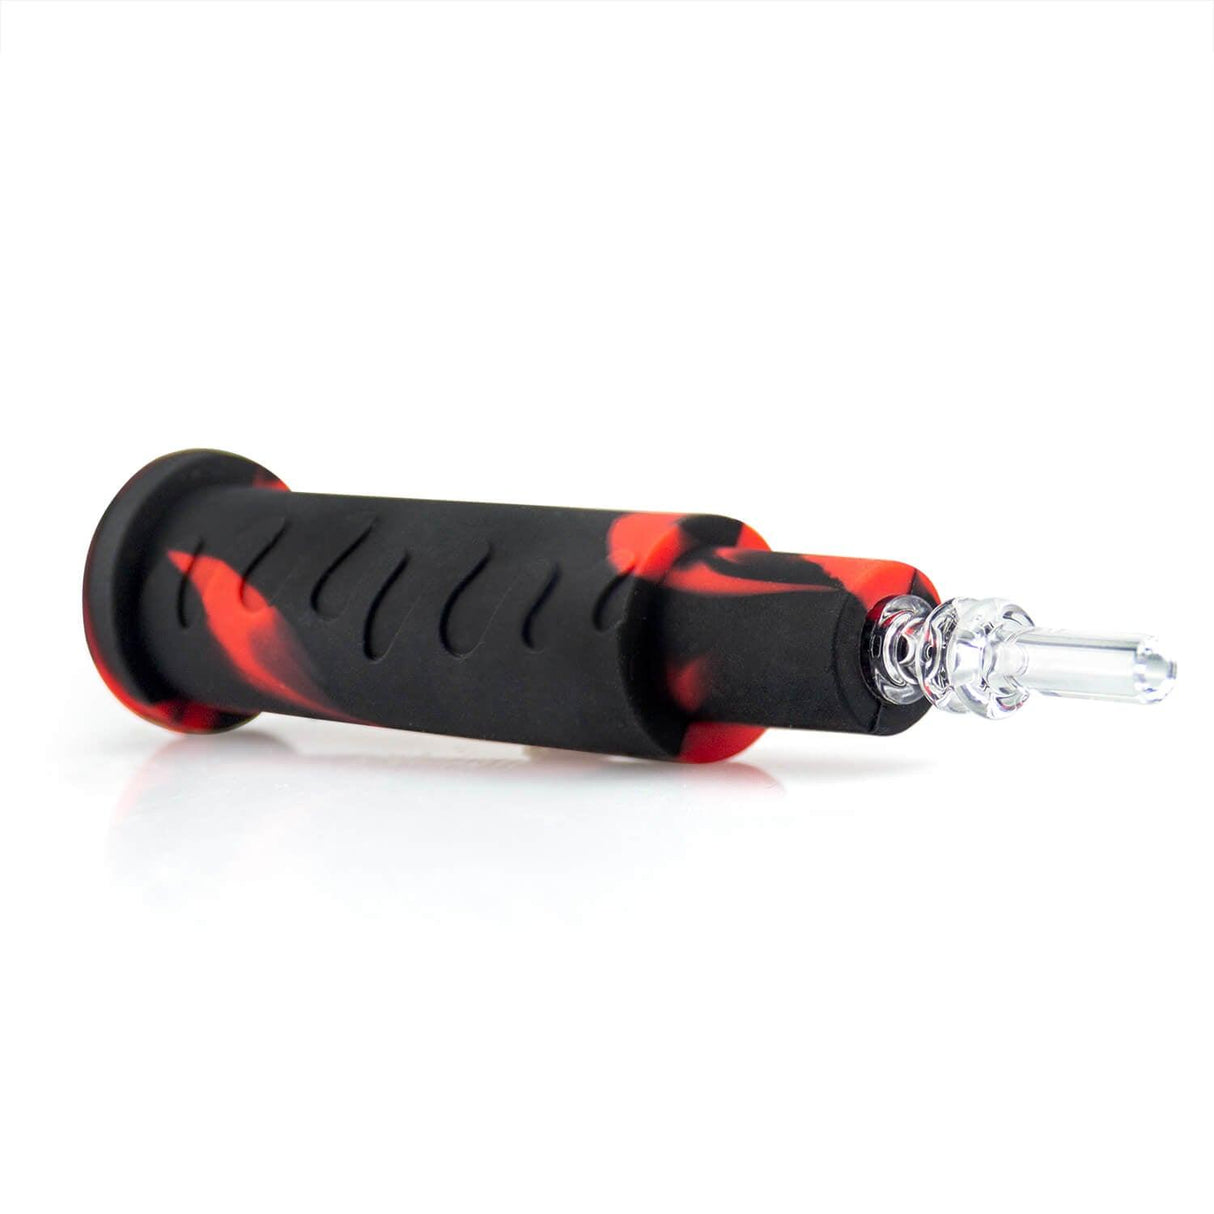 PILOT DIARY Honey Straw Nectar Collector Kit with Red and Black Design - Side View